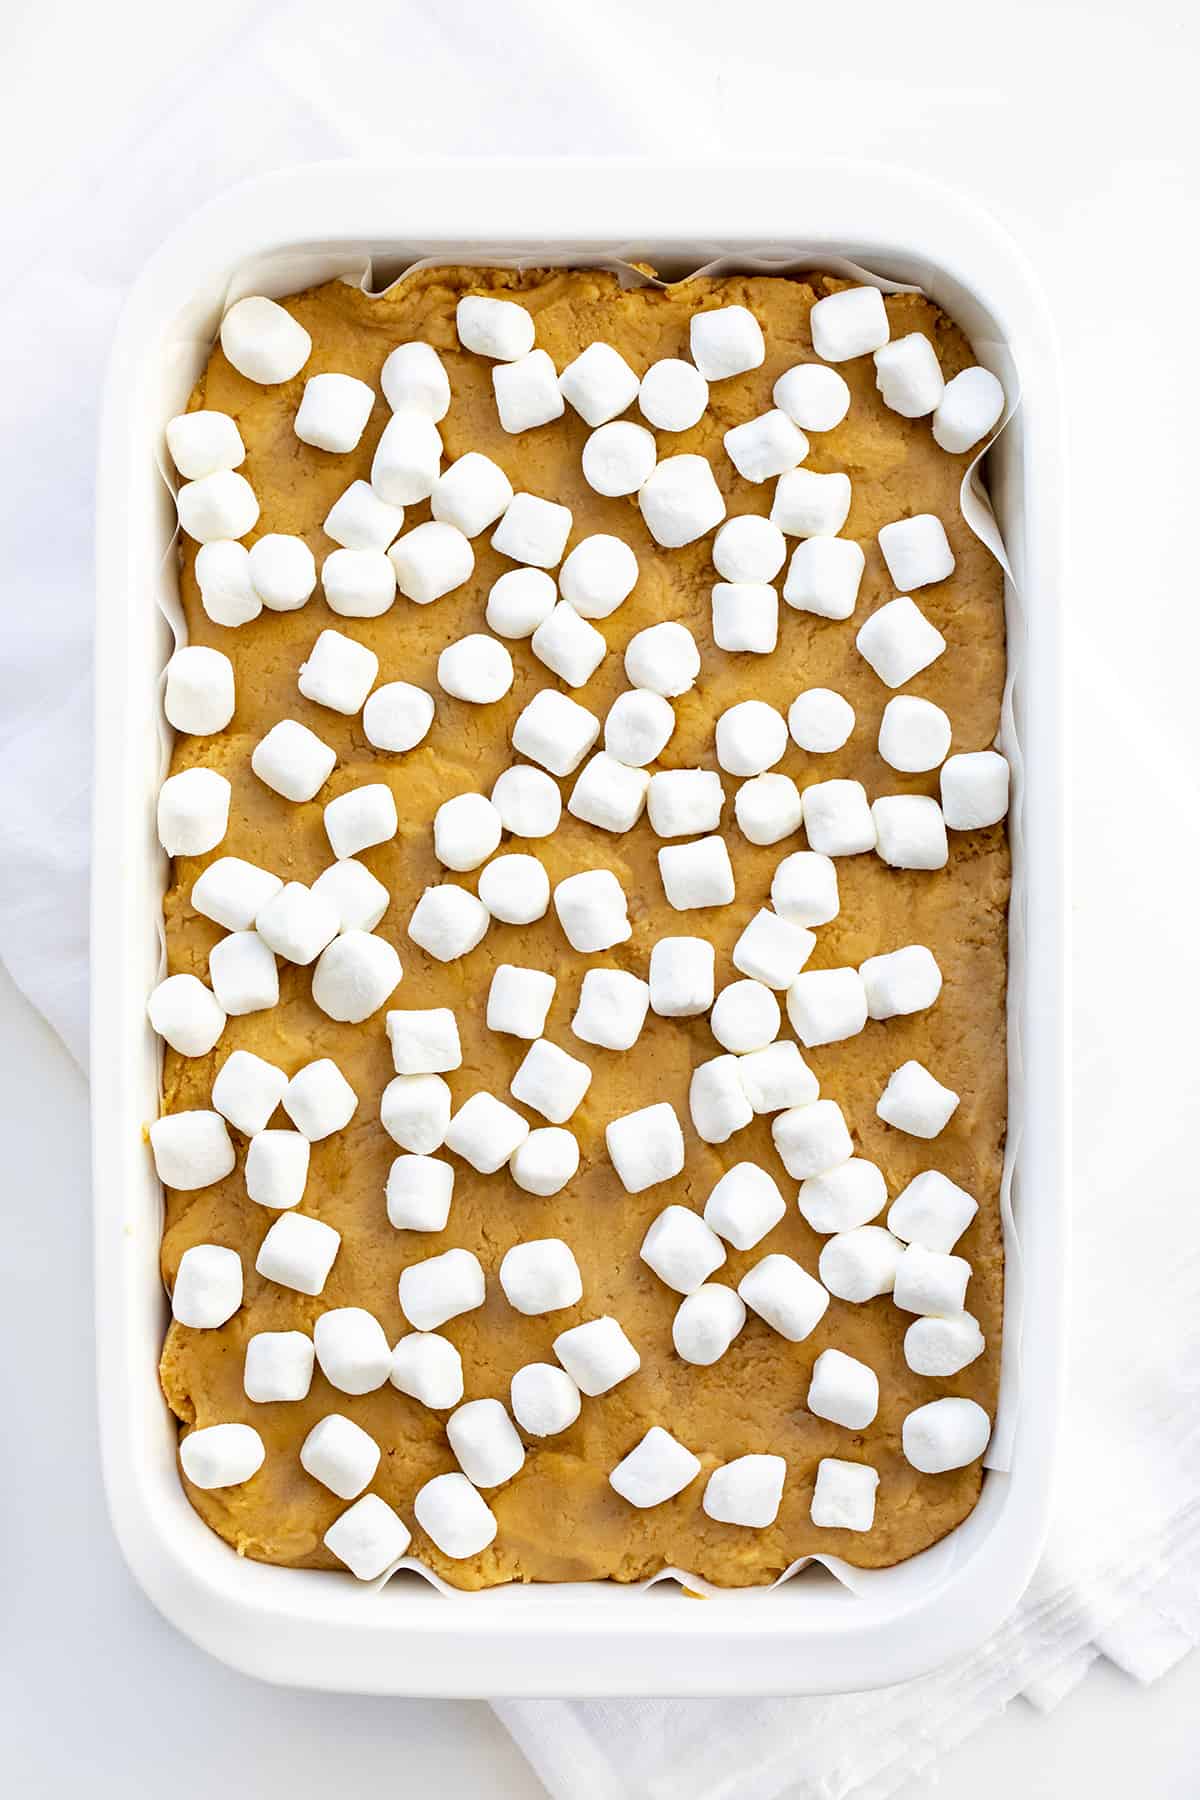 Pan of Completed Fluffernutter Fudge that Shows Peanut Butter Fudge Topped with Mini Marshmallows on White Counter. 